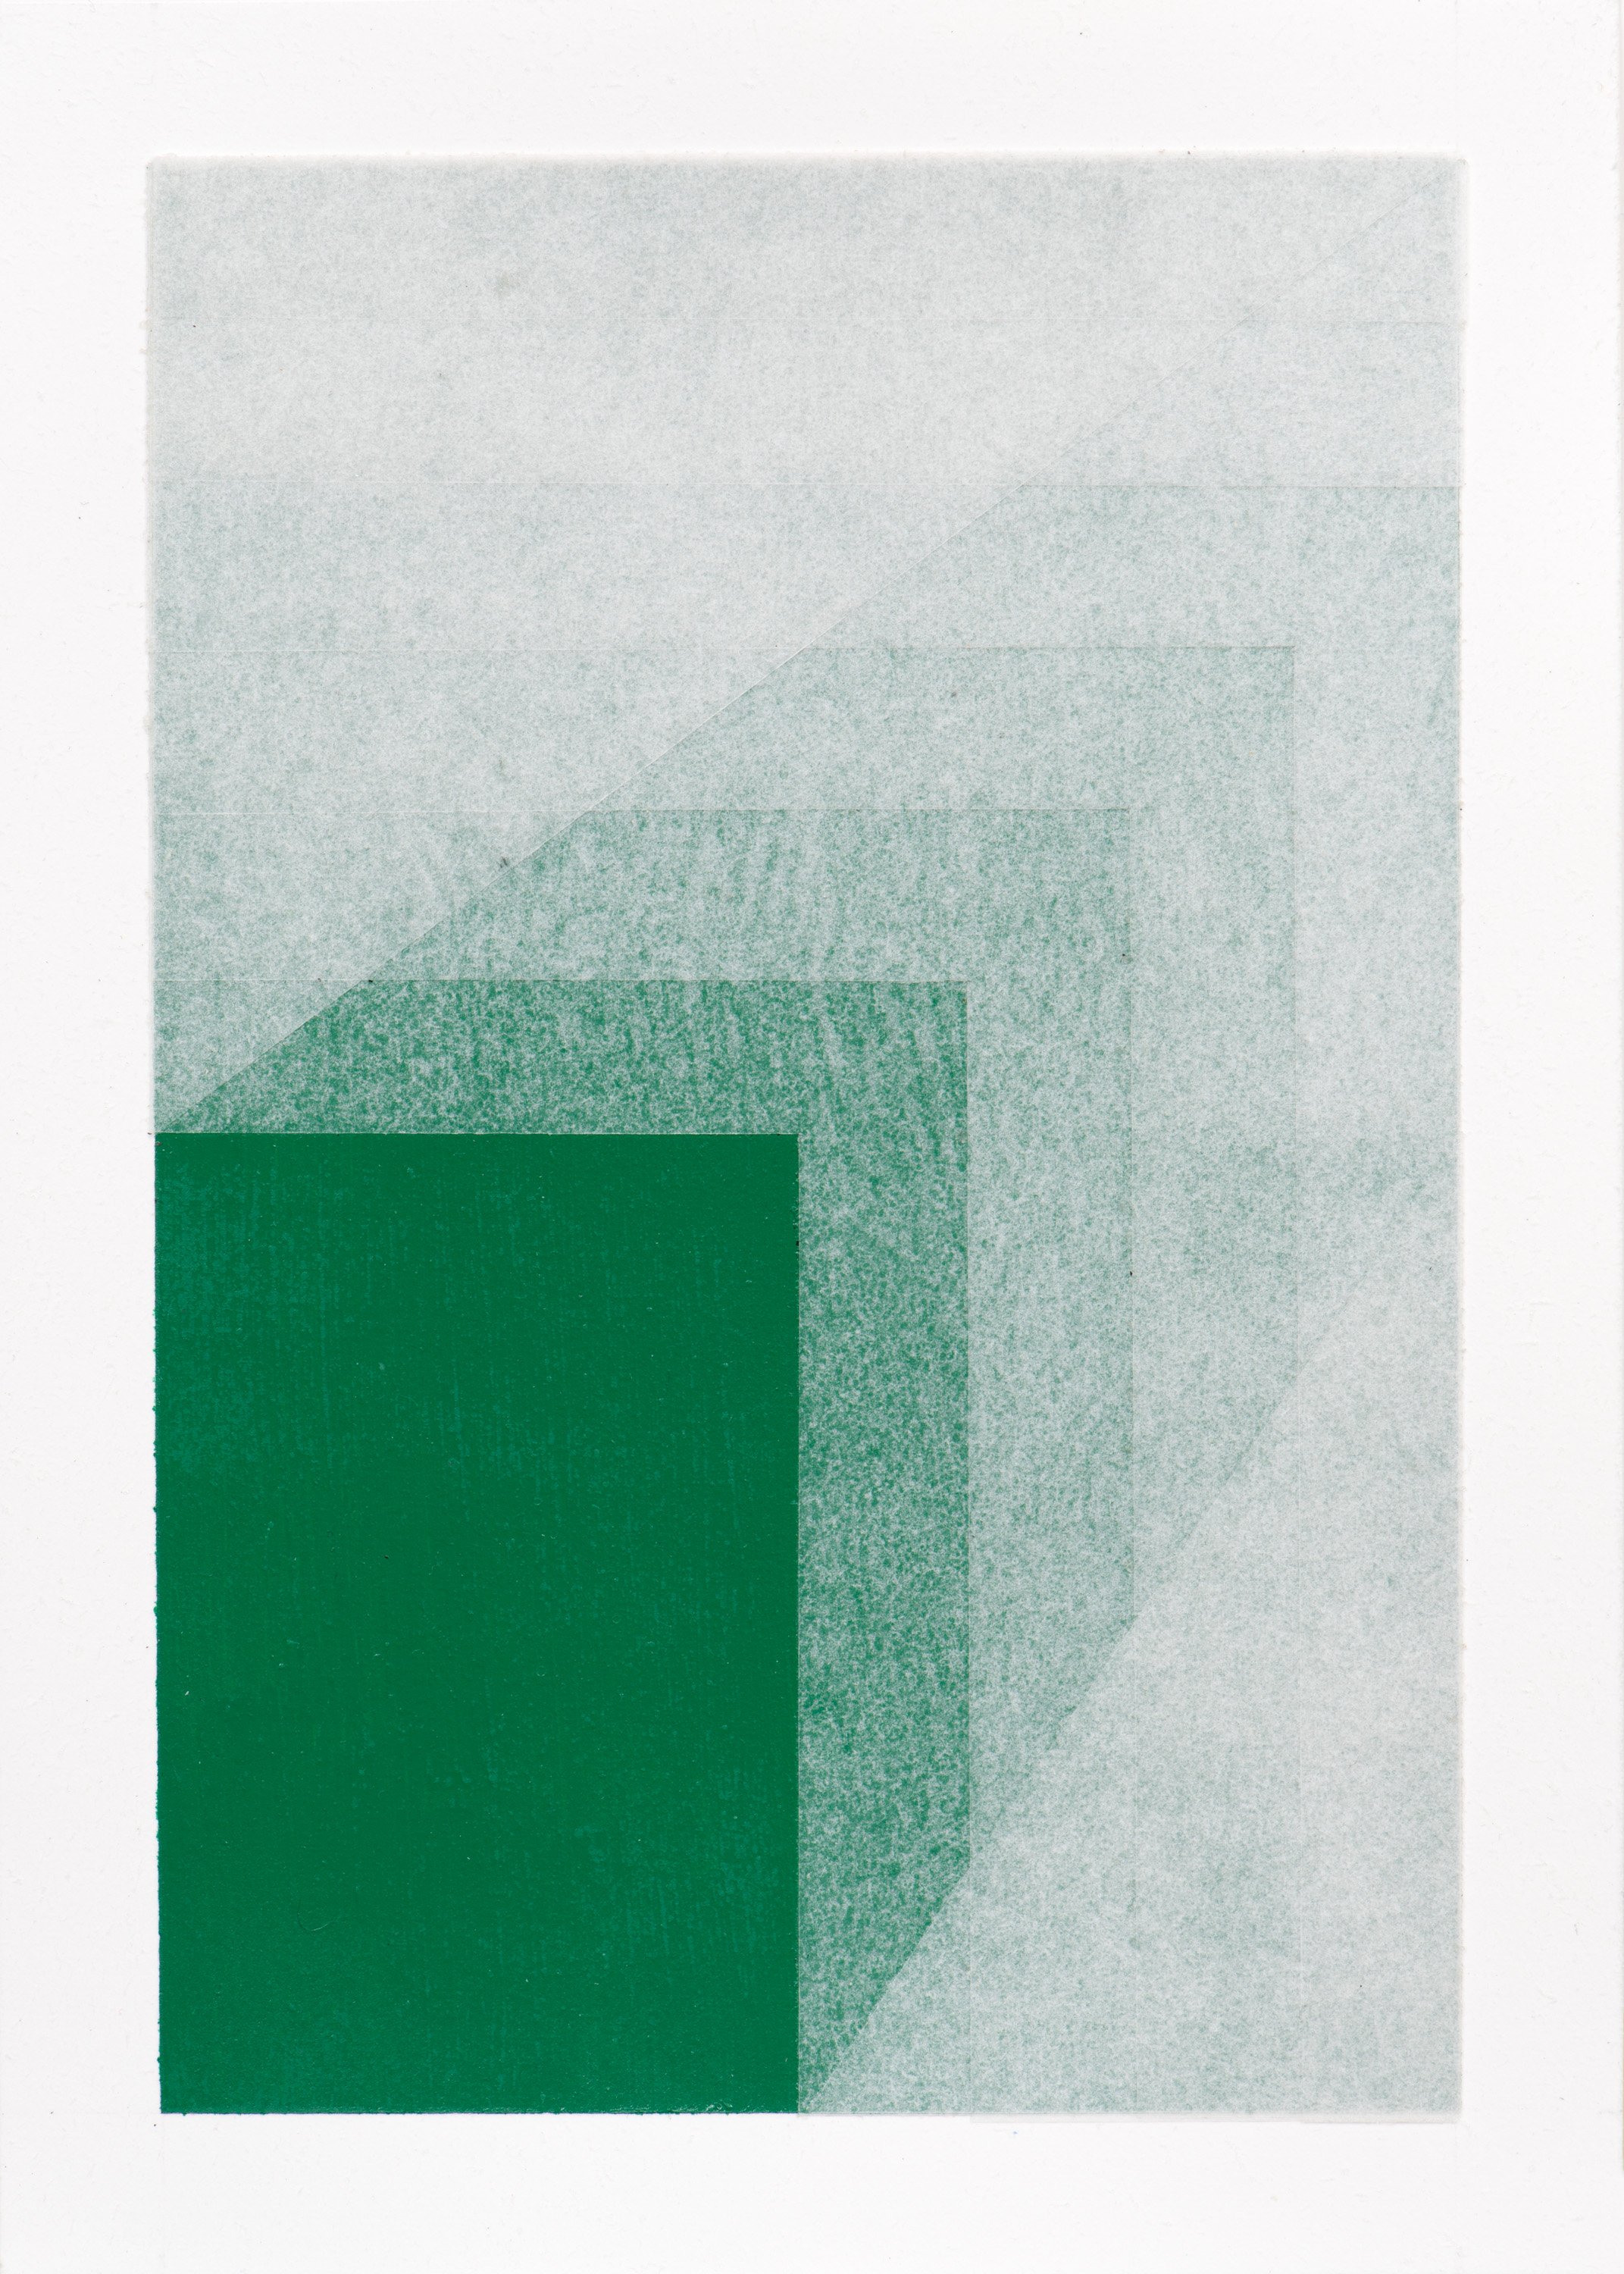   Emerald Green , 2017 Acrylic and vellum on paper 9 3/4 x 6 3/4 inches 